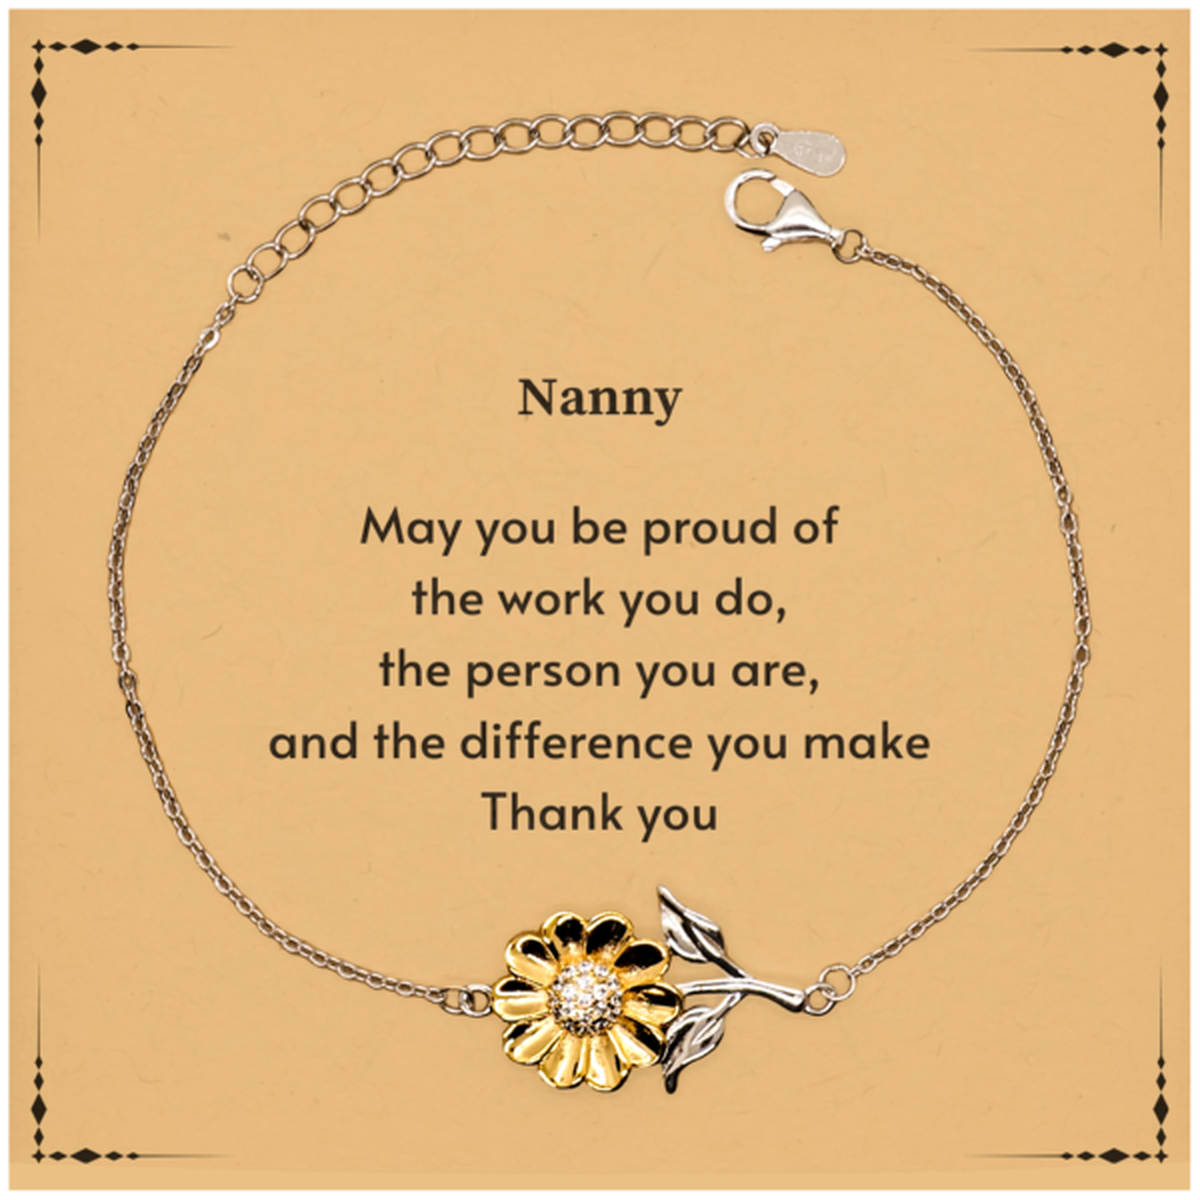 Heartwarming Sunflower Bracelet Retirement Coworkers Gifts for Nanny, Nanny May You be proud of the work you do, the person you are Gifts for Boss Men Women Friends